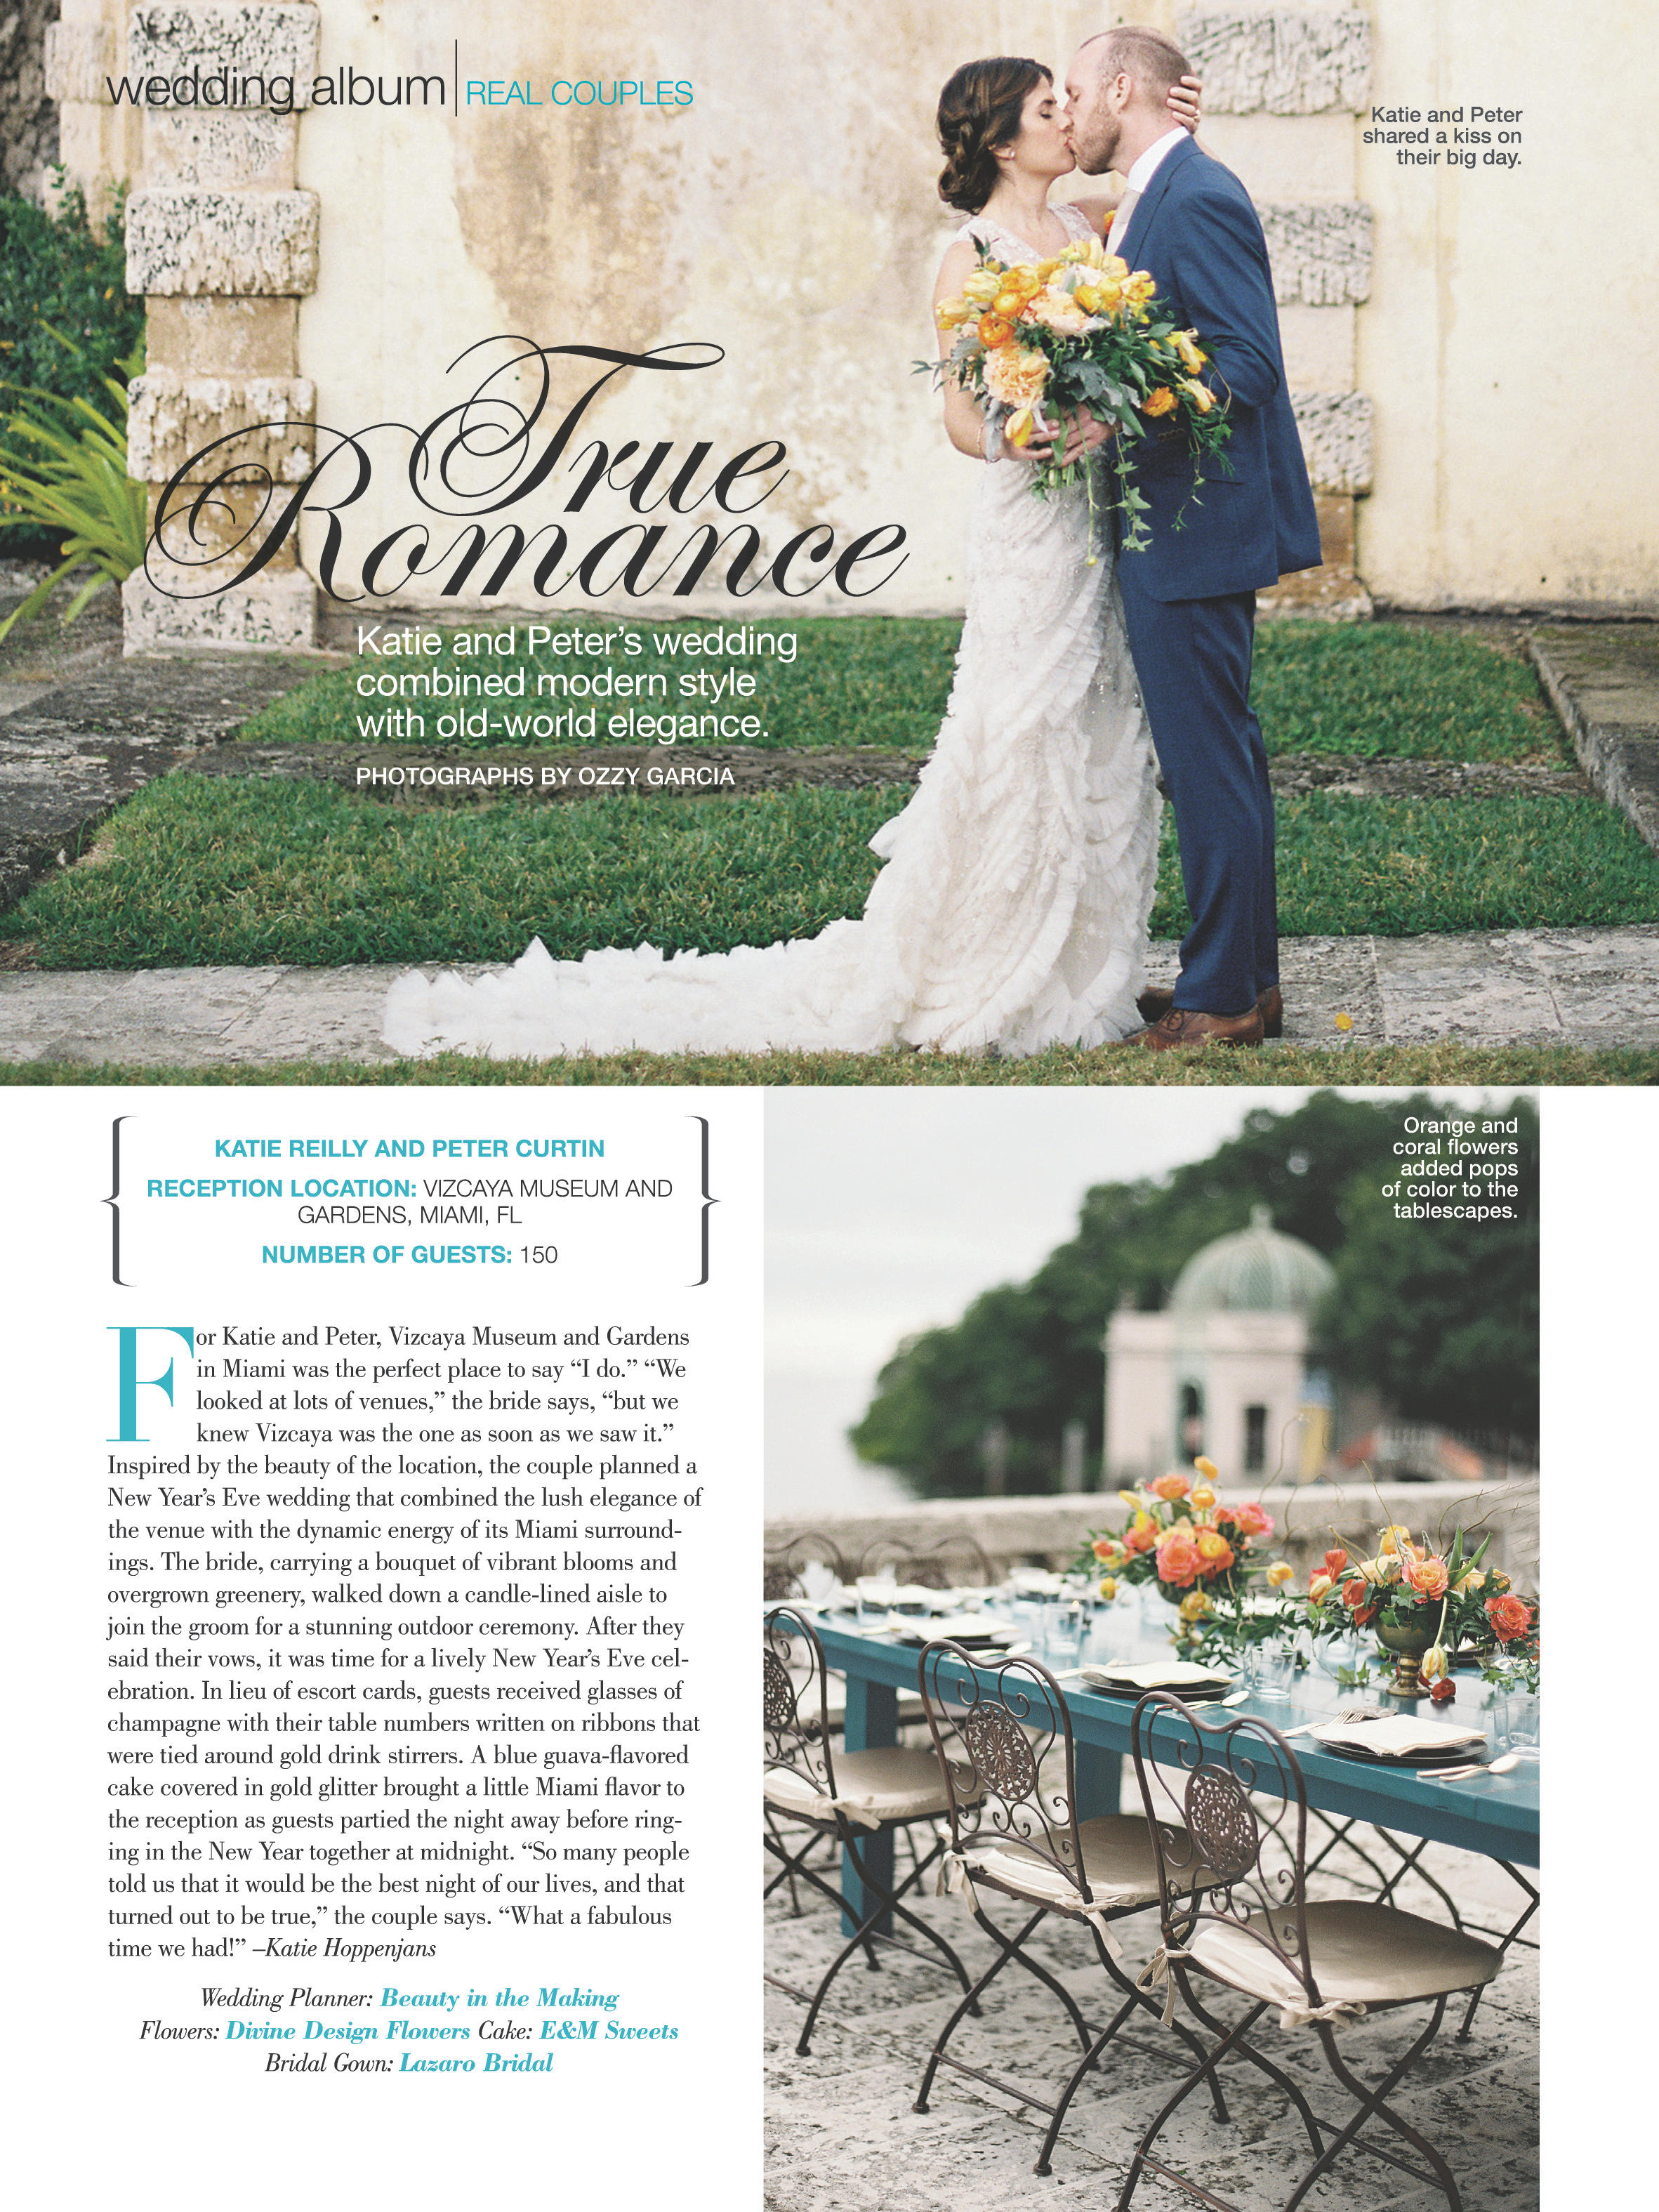 Bridal Guide magazine Katie and Peter Wedding Page  May:June.jpg